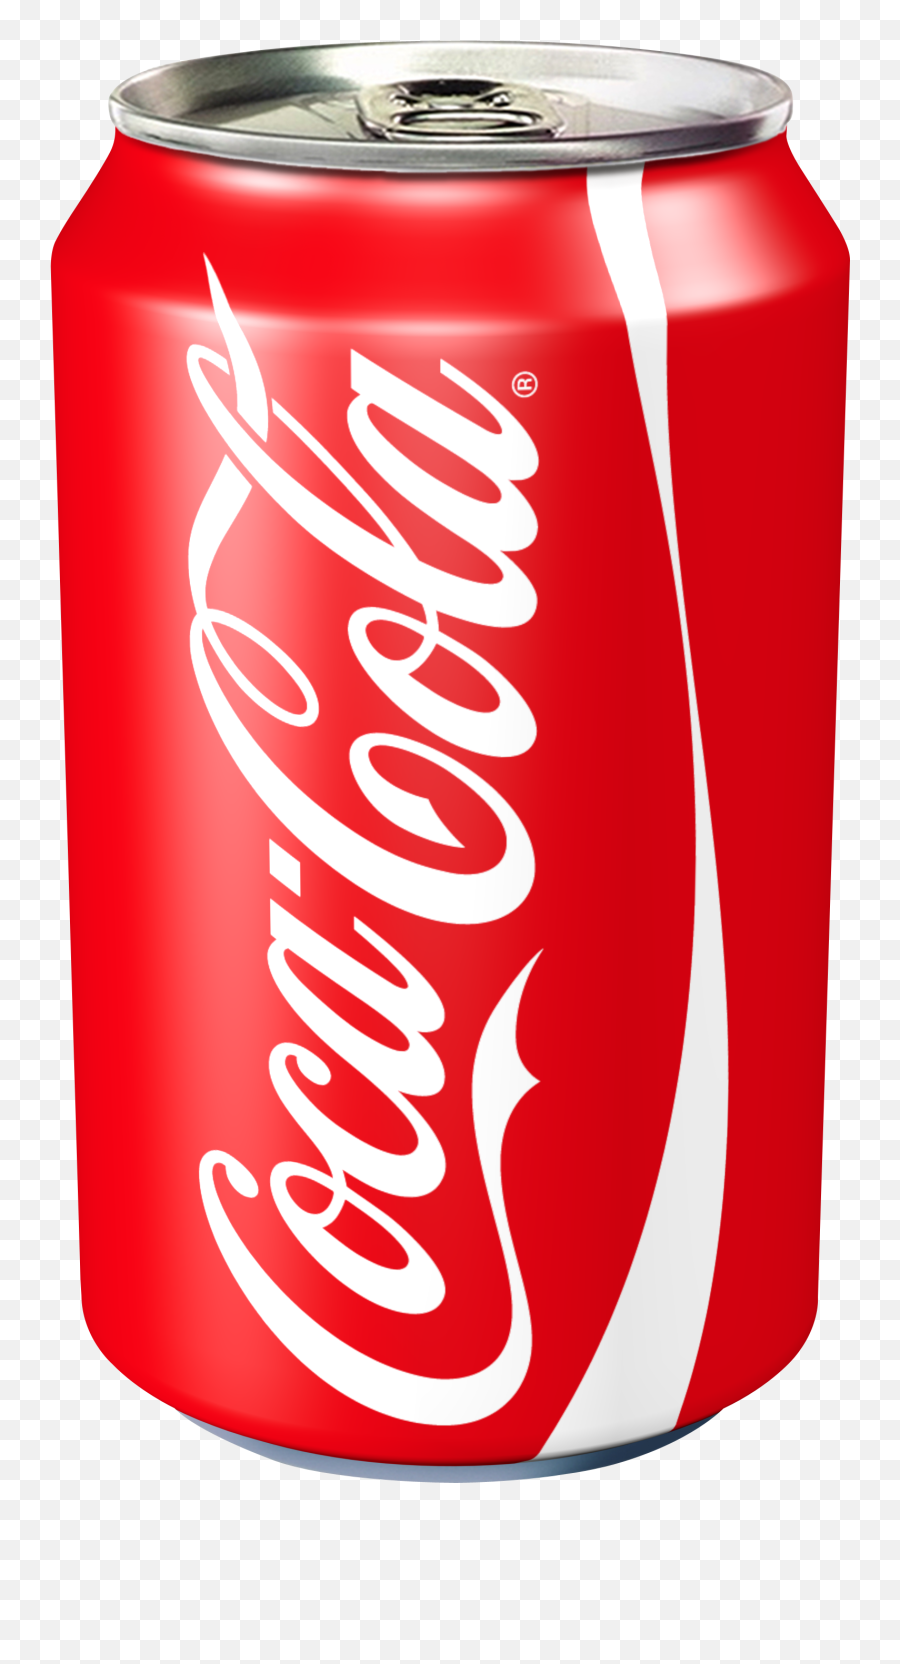 Coca Cola Can Transparent Image - Coca Cola Can Png,Coke Can Transparent Background